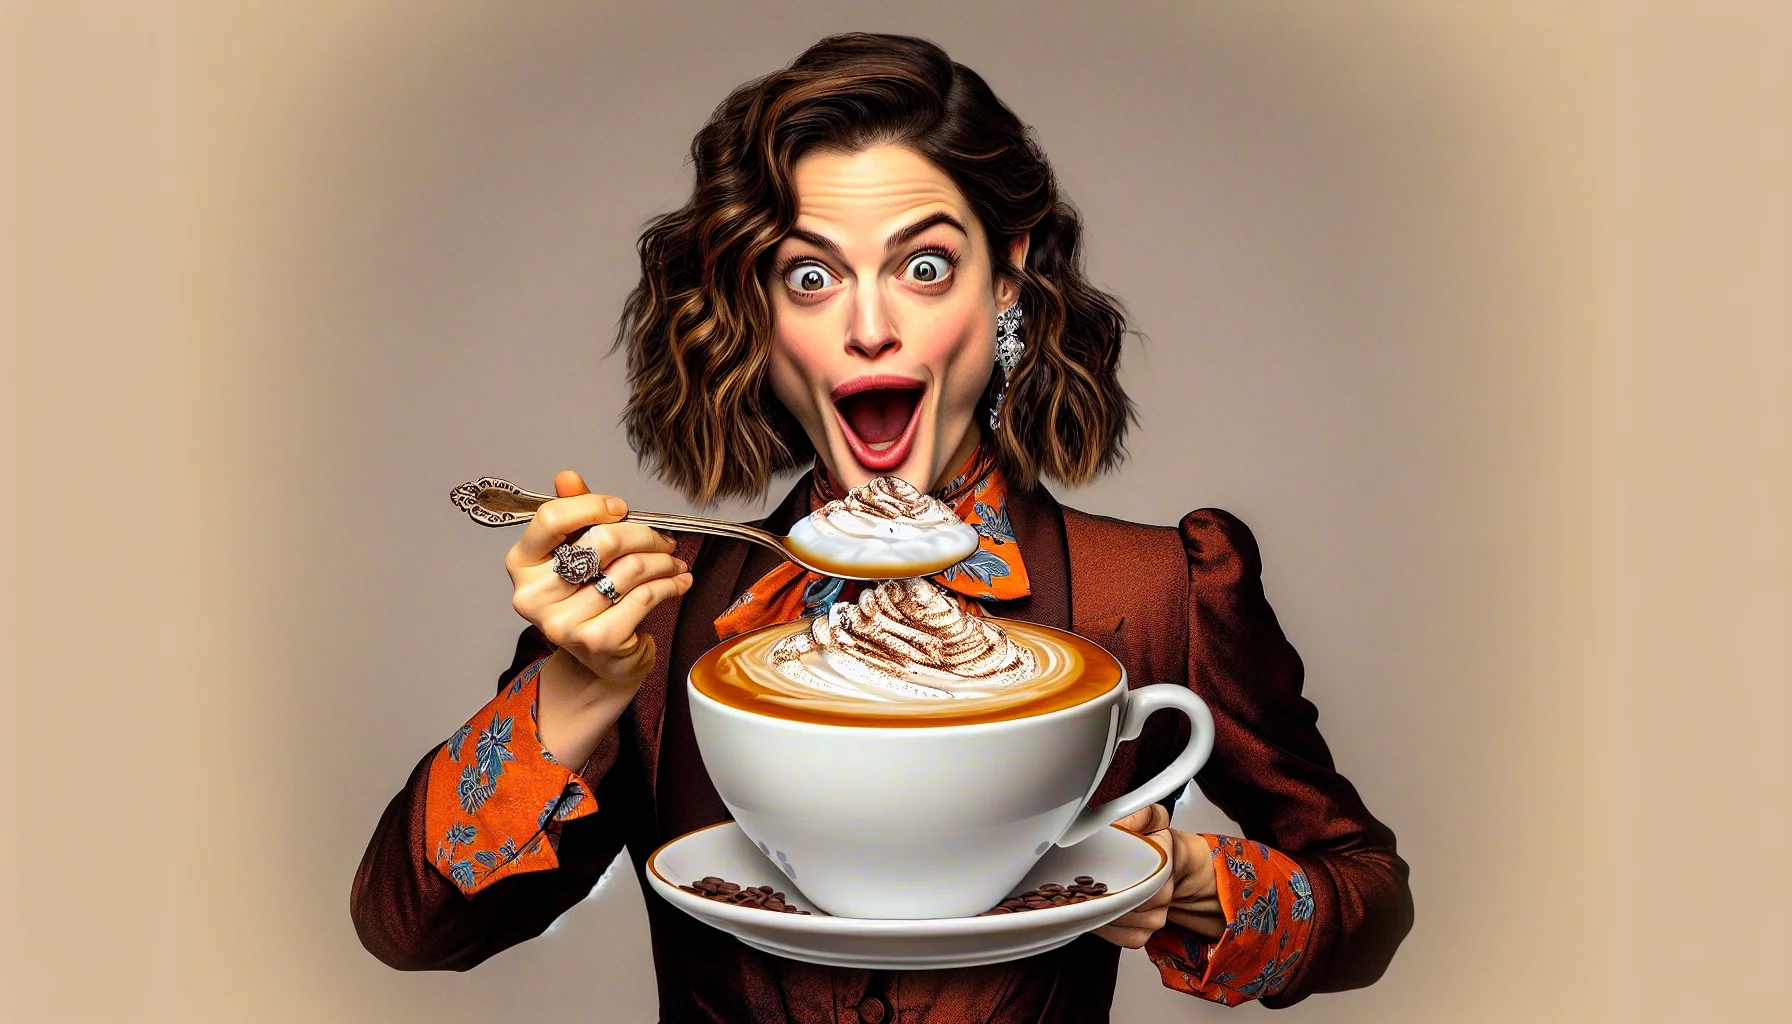 Generate an image featuring a talented female actor, who carries a striking resemblance to Elizabeth Cappuccino, inviting people to enjoy a jovial scenario. She should be charmingly dressed, goofily holding an oversize spoon full of frothy cappuccino with hilarious surprise on her face.